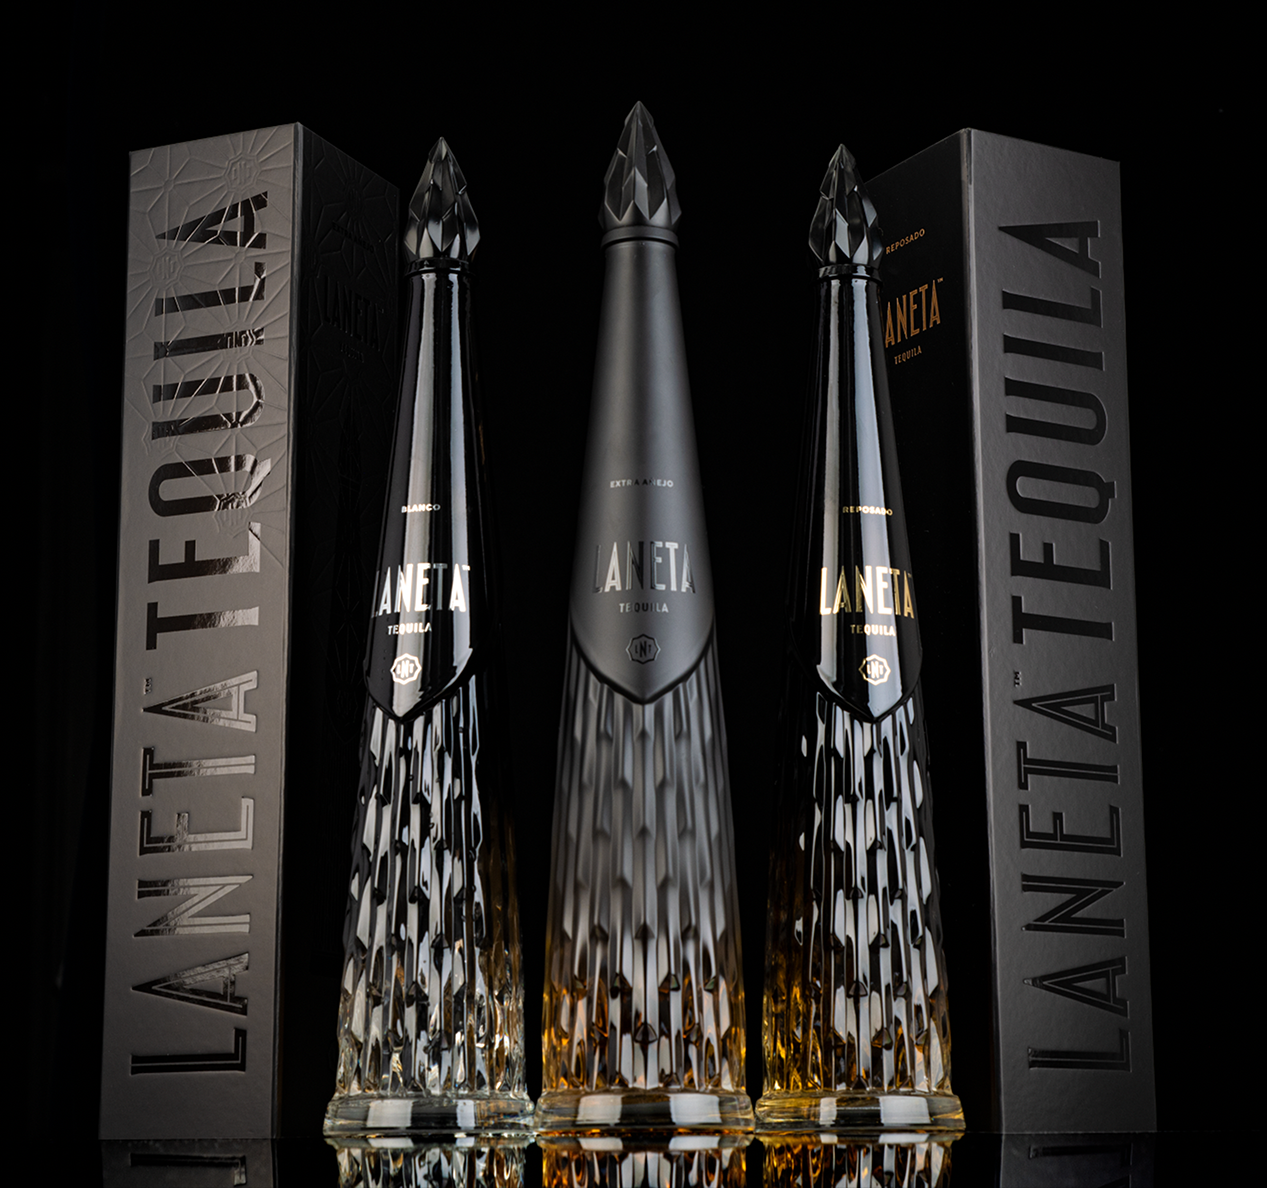 The Top 5 Tequila Bottle Designs 